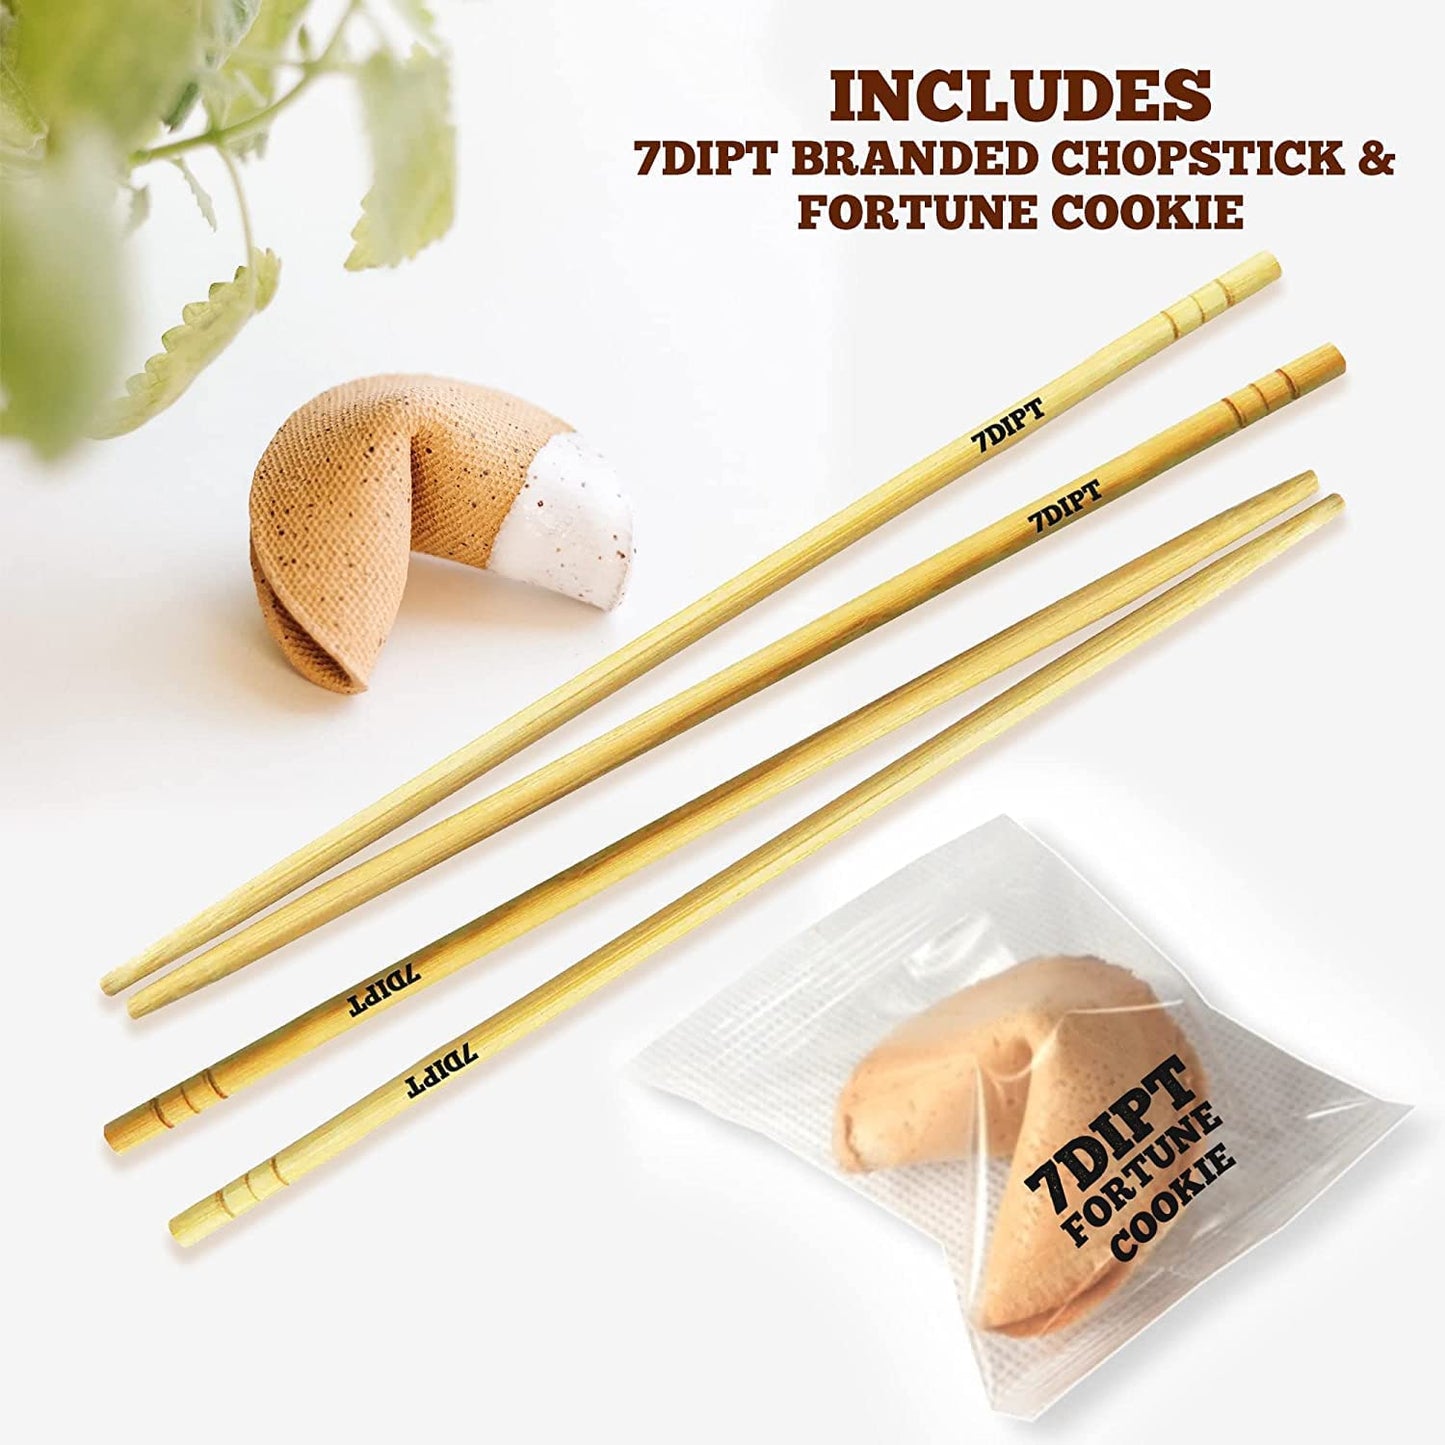 Hot & Spicy Asian Ramen Pack: 15-Pack Assorted Instant Noodles with Fortune Cookie & Chopsticks Bonus!